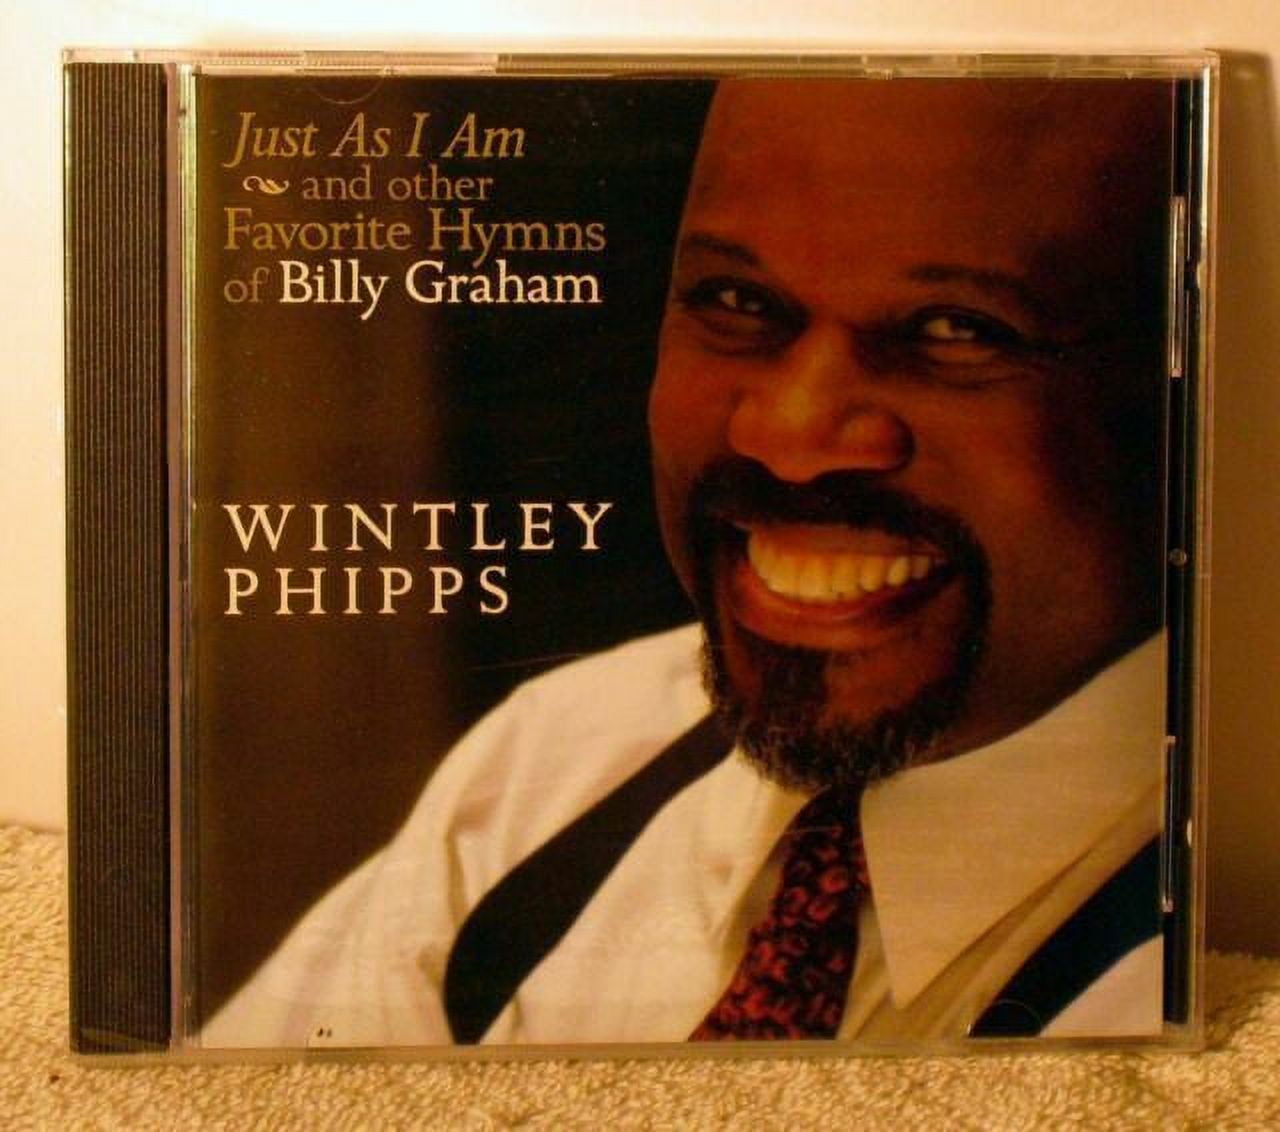 Pre-Owned Just As I Am And Other Favorite Hymns Of Billy Graham by Wintley Phipps (CD, 2005, Discovery House Music)